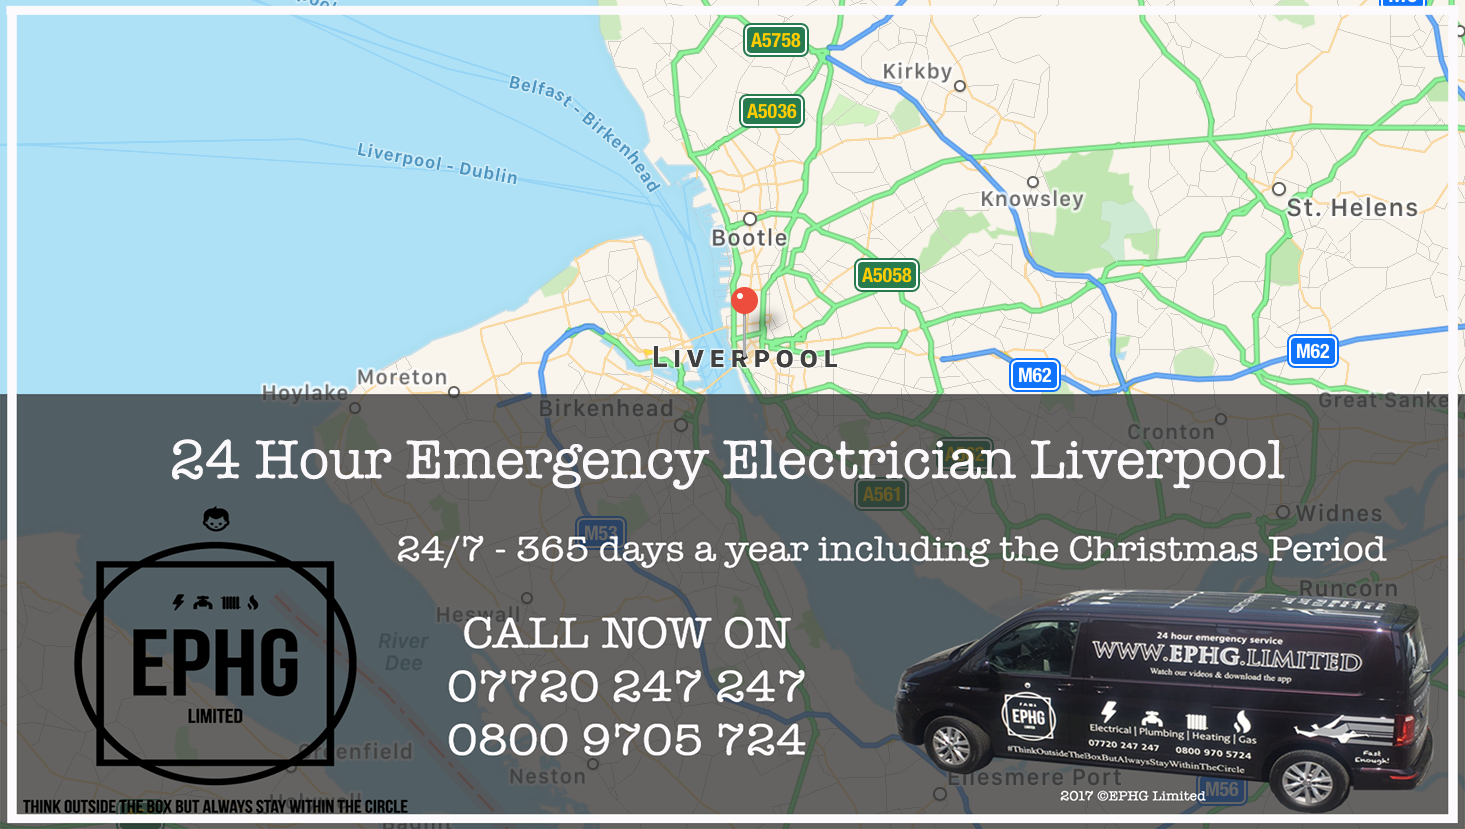 24 Hour Emergency Electrician Liverpool